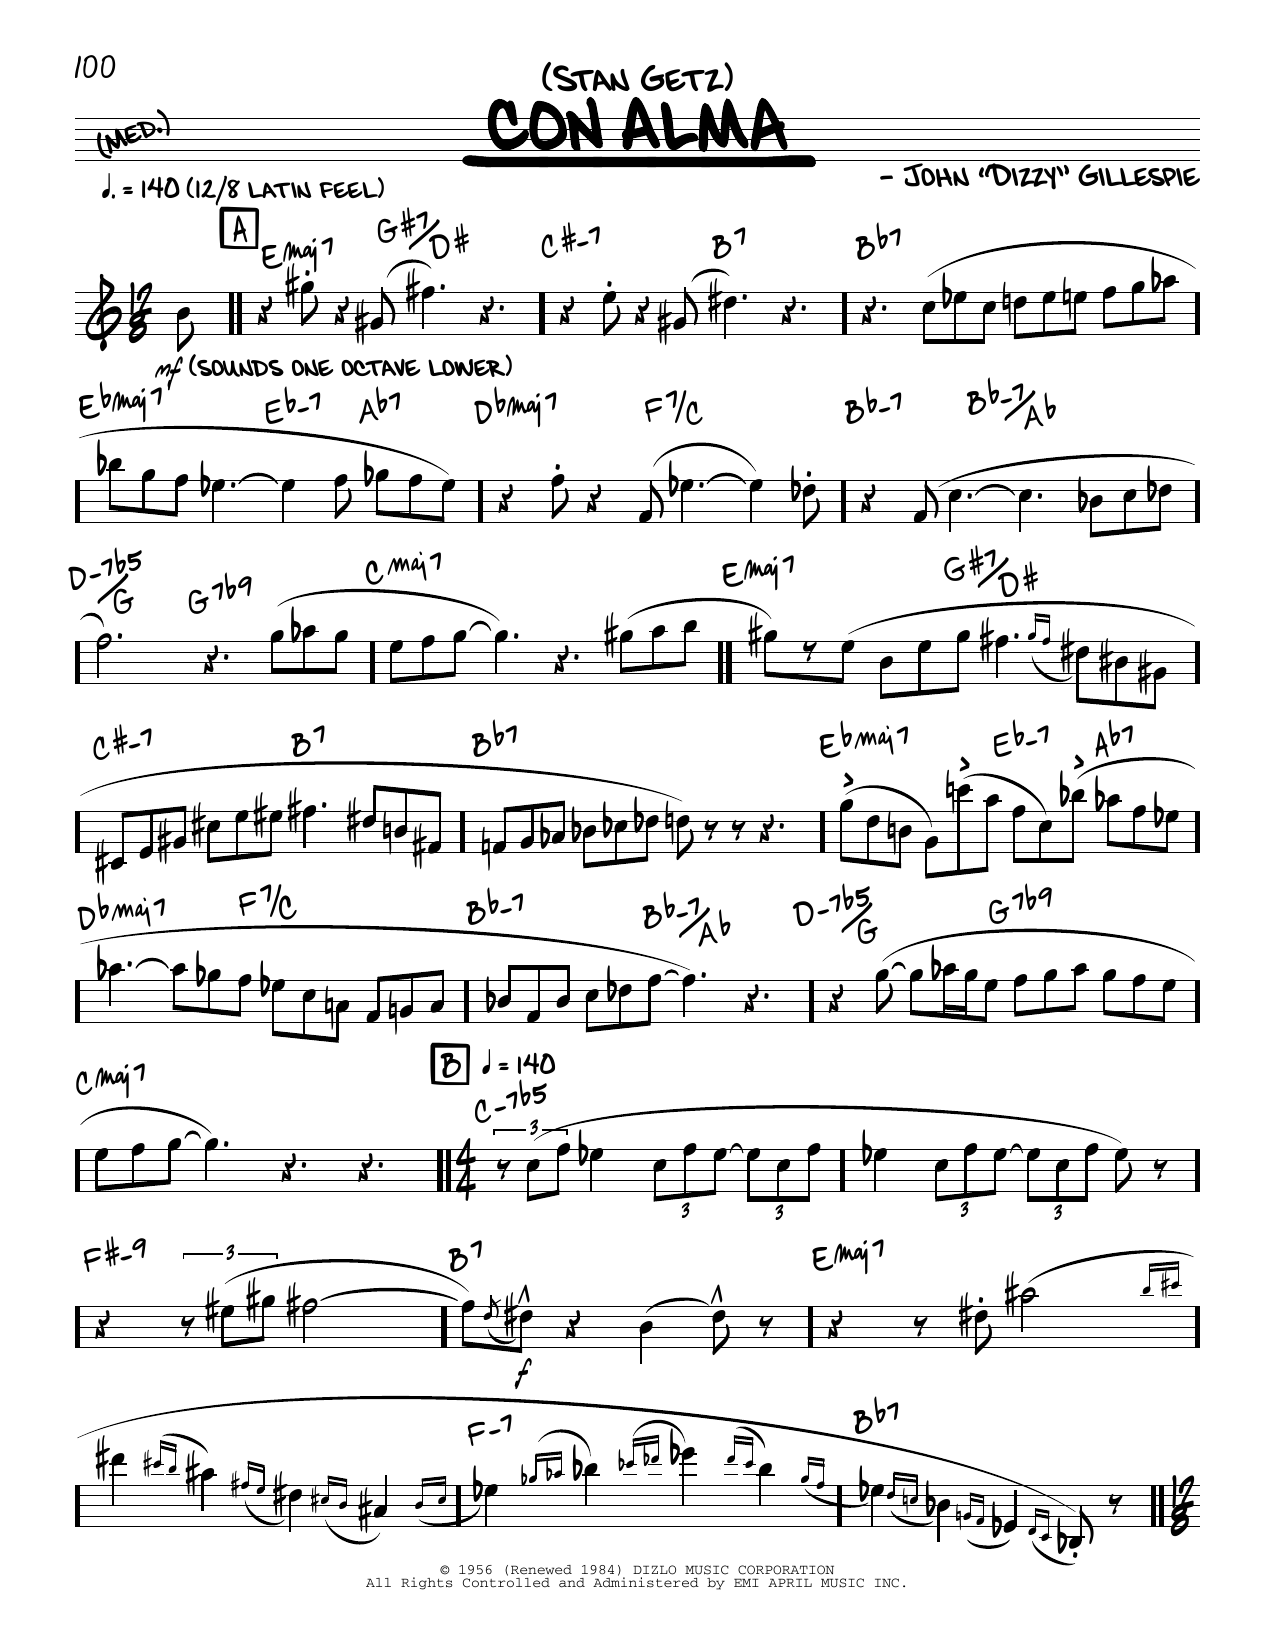 Download Stan Getz Con Alma (solo only) Sheet Music